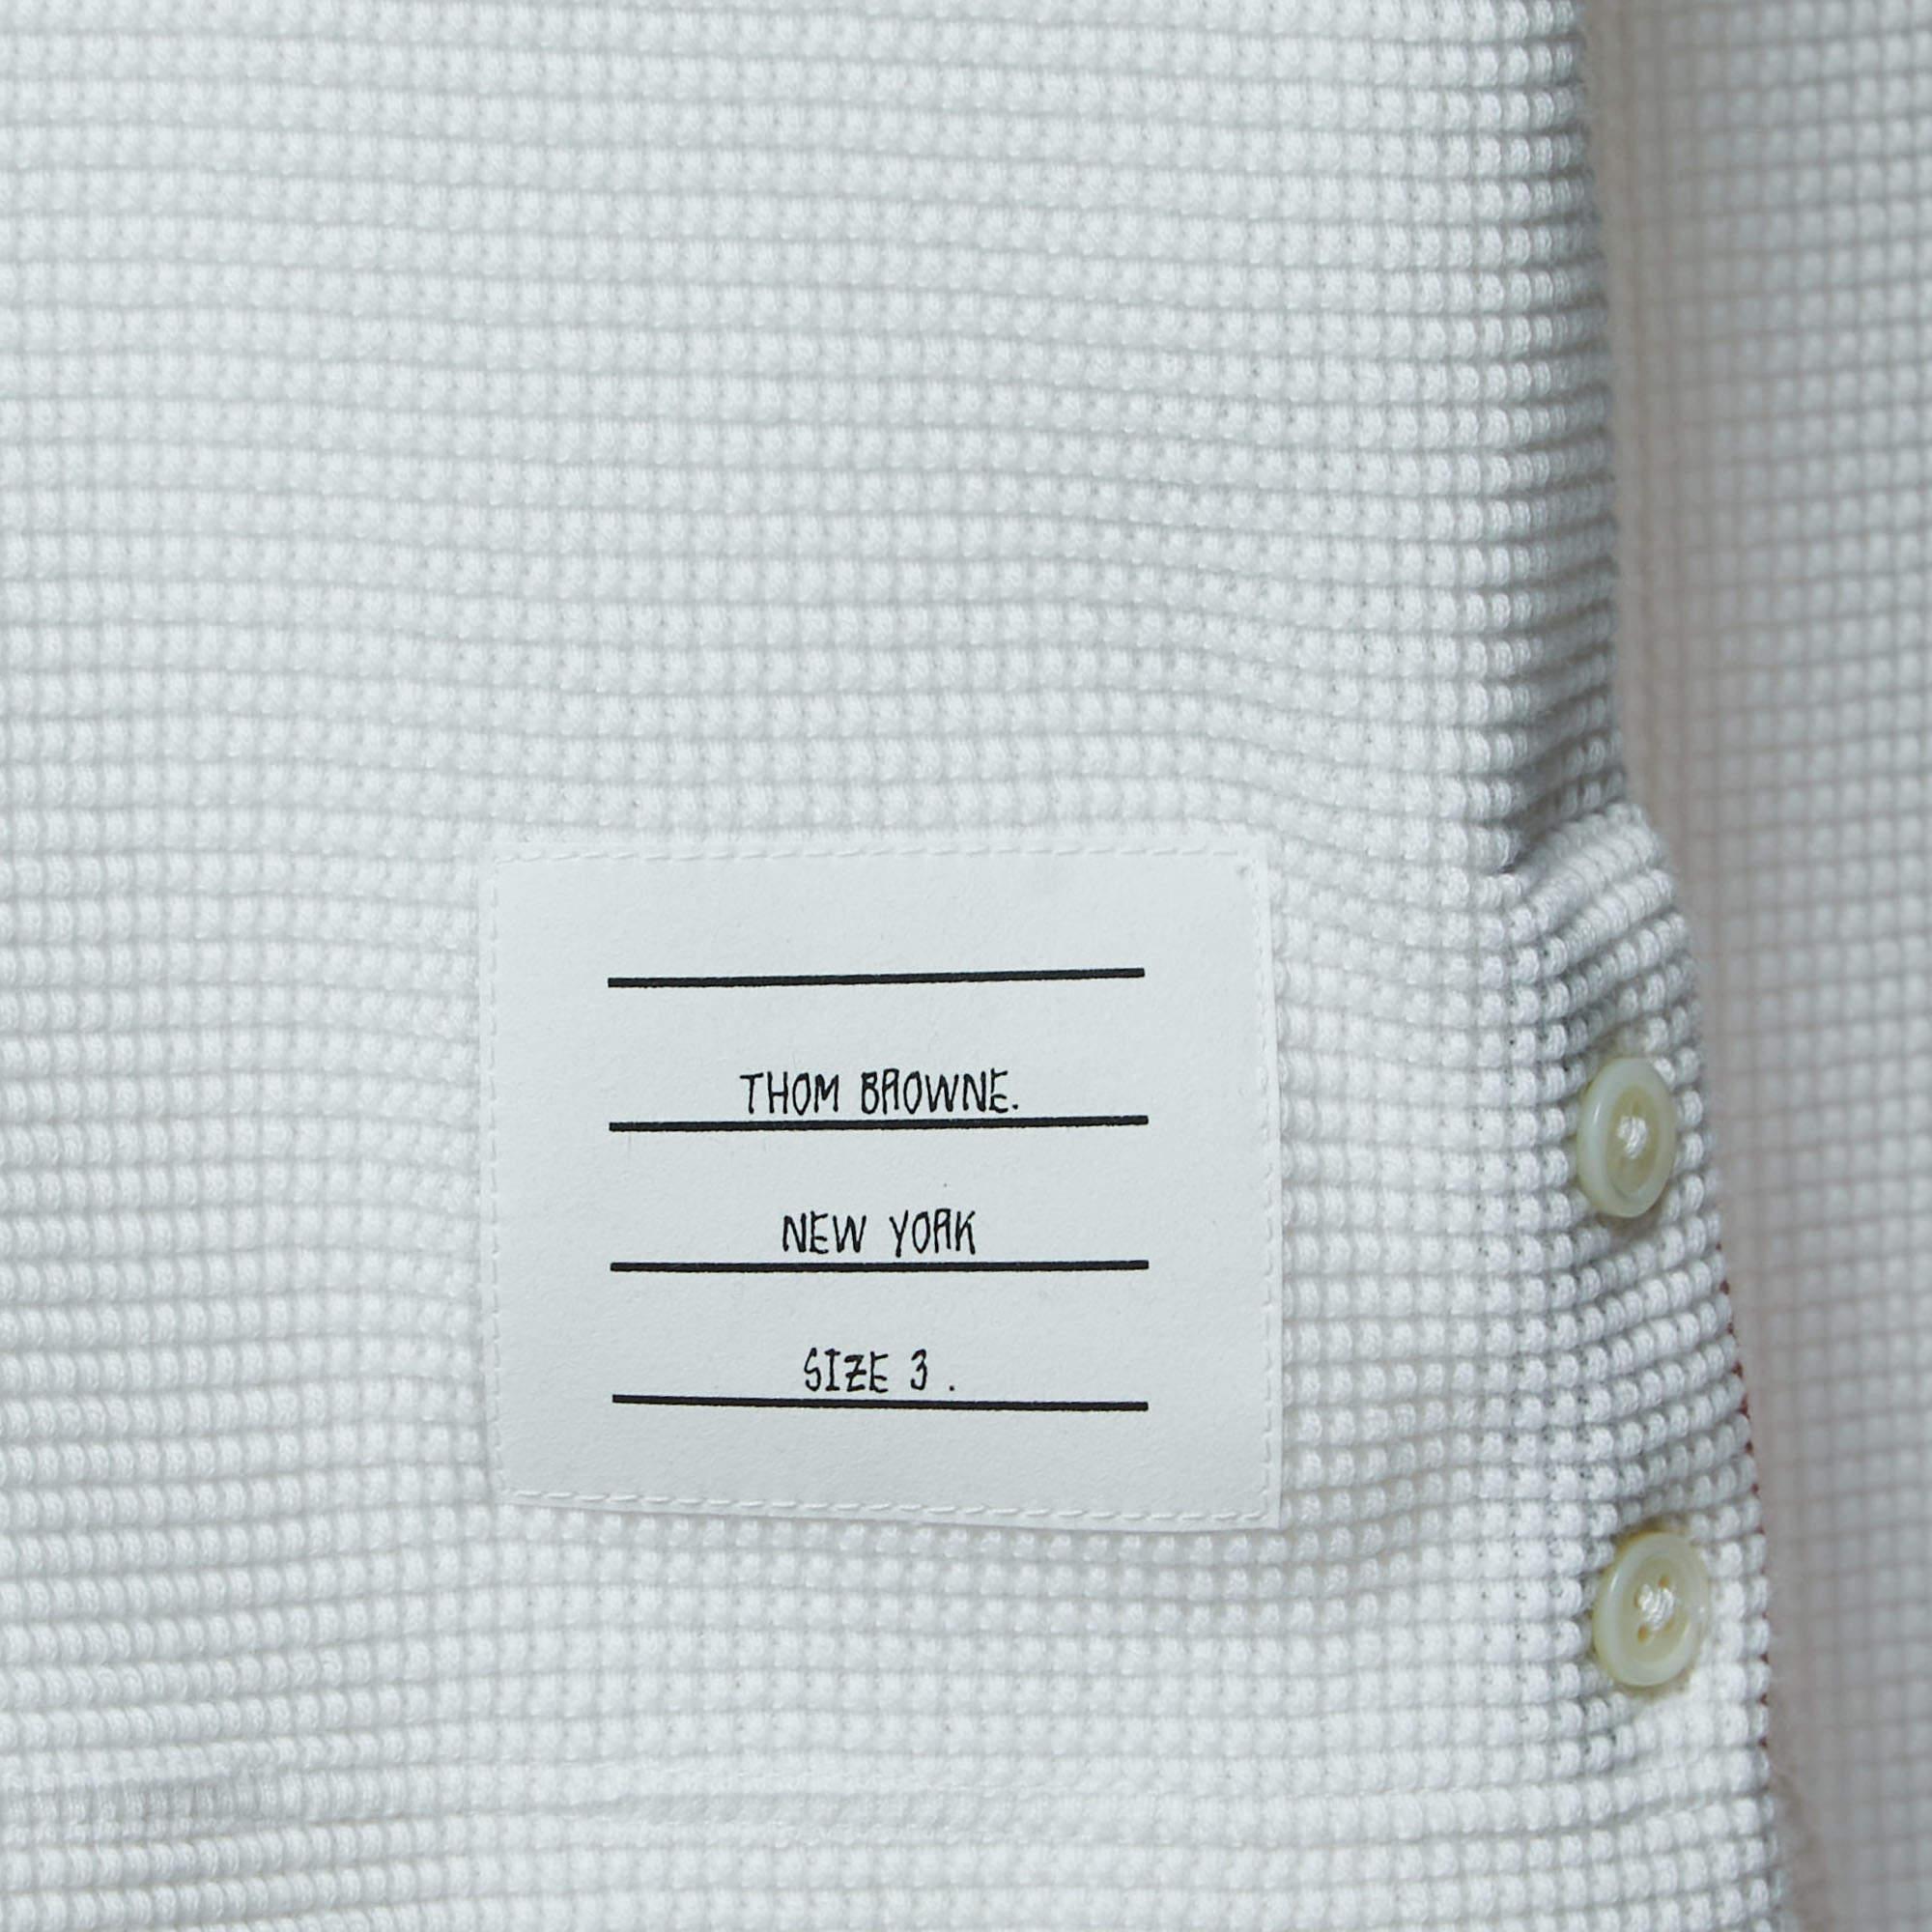 Thom Browne White Waffle Knit Turtleneck Sweater L In Excellent Condition For Sale In Dubai, Al Qouz 2